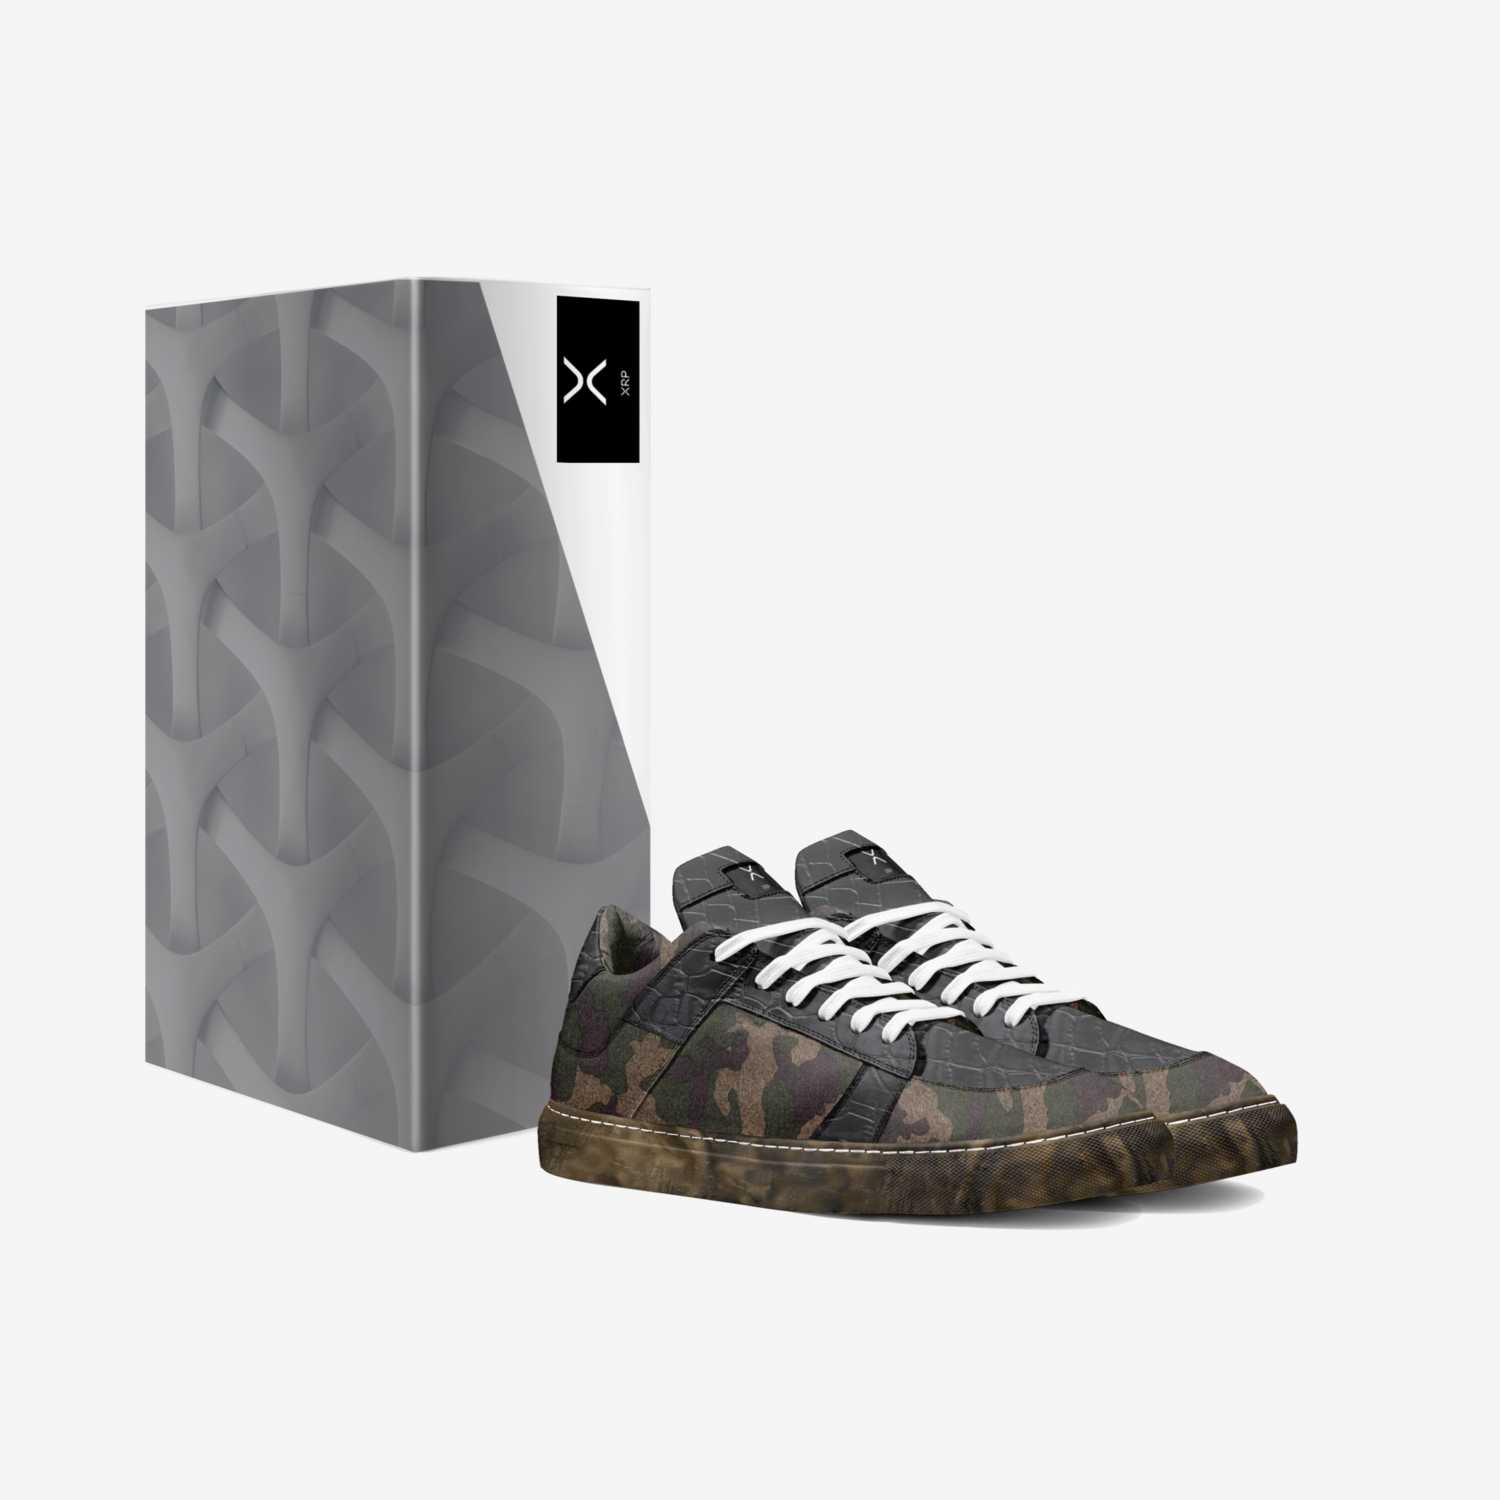 XRP ARMY LUXURY custom made in Italy shoes by Garland L Mclaughlin | Box view